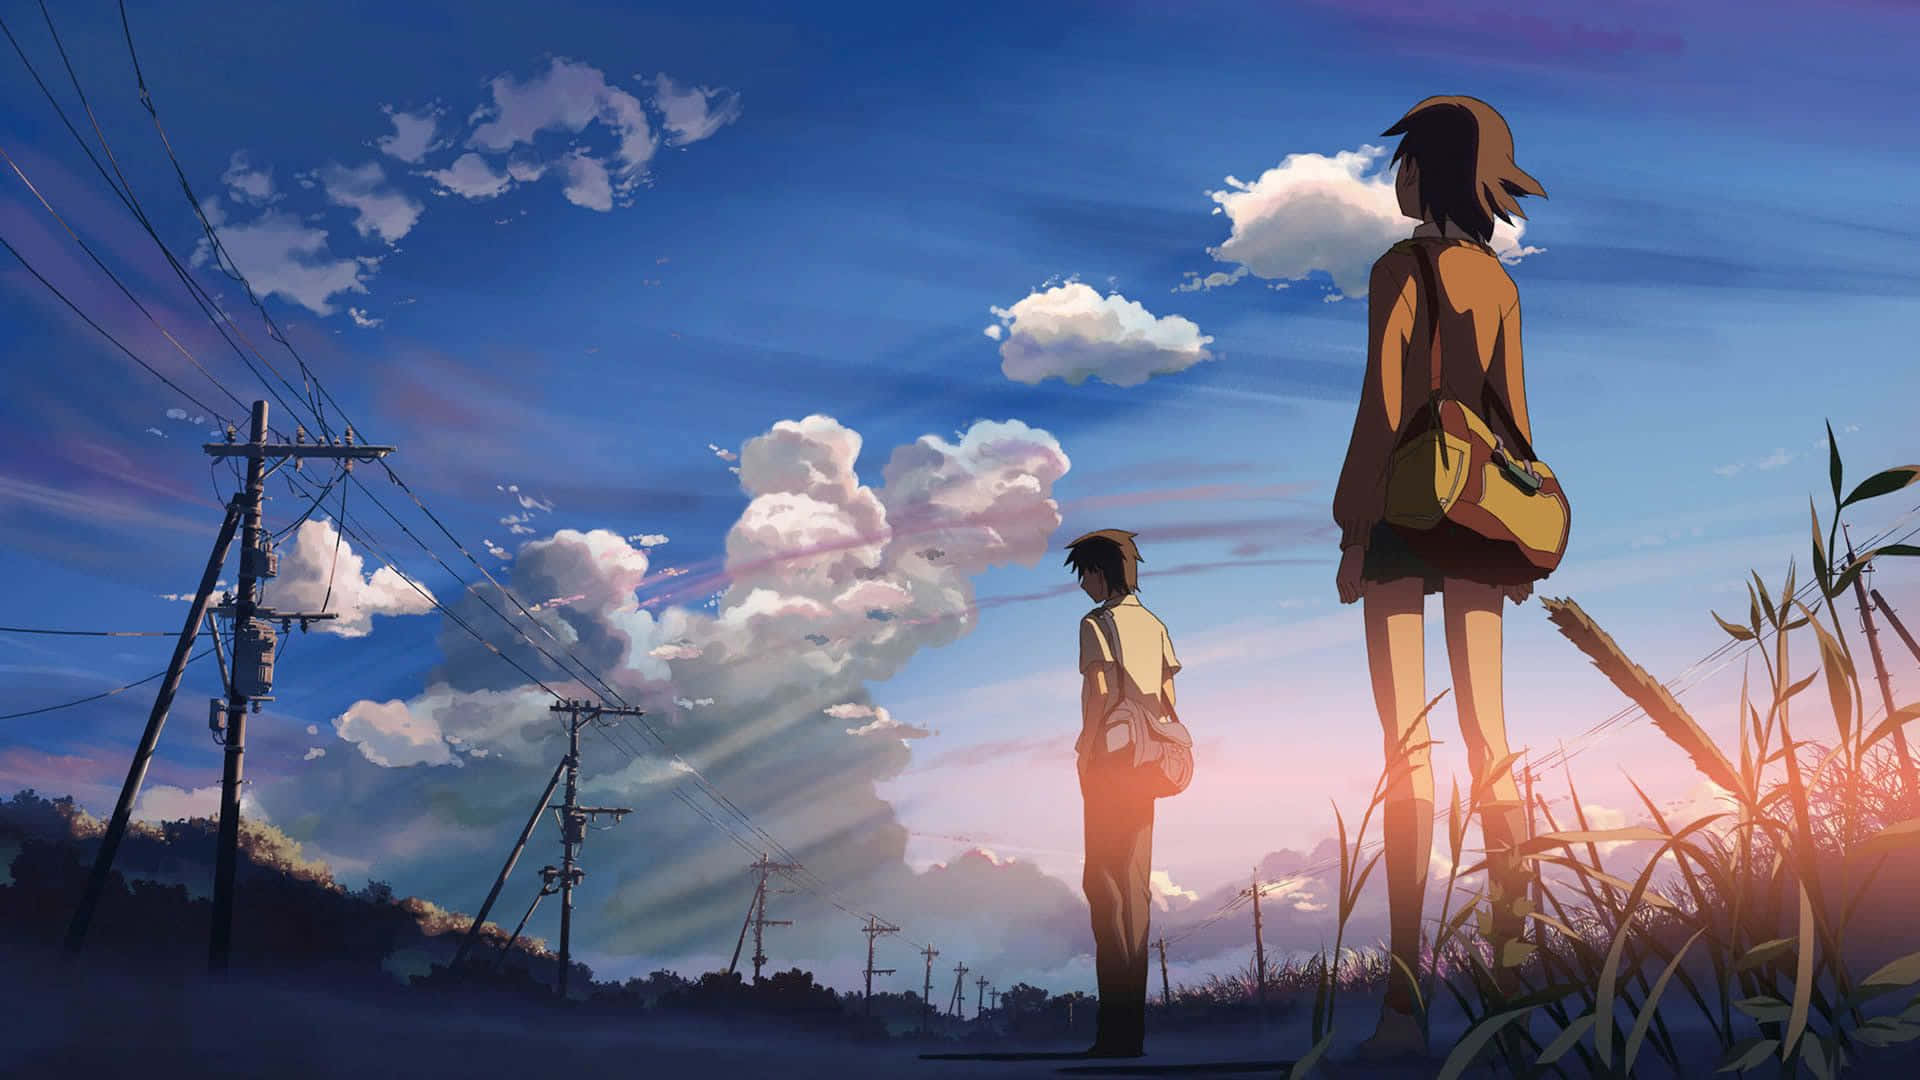 Two People Standing On A Field With Clouds In The Background Wallpaper